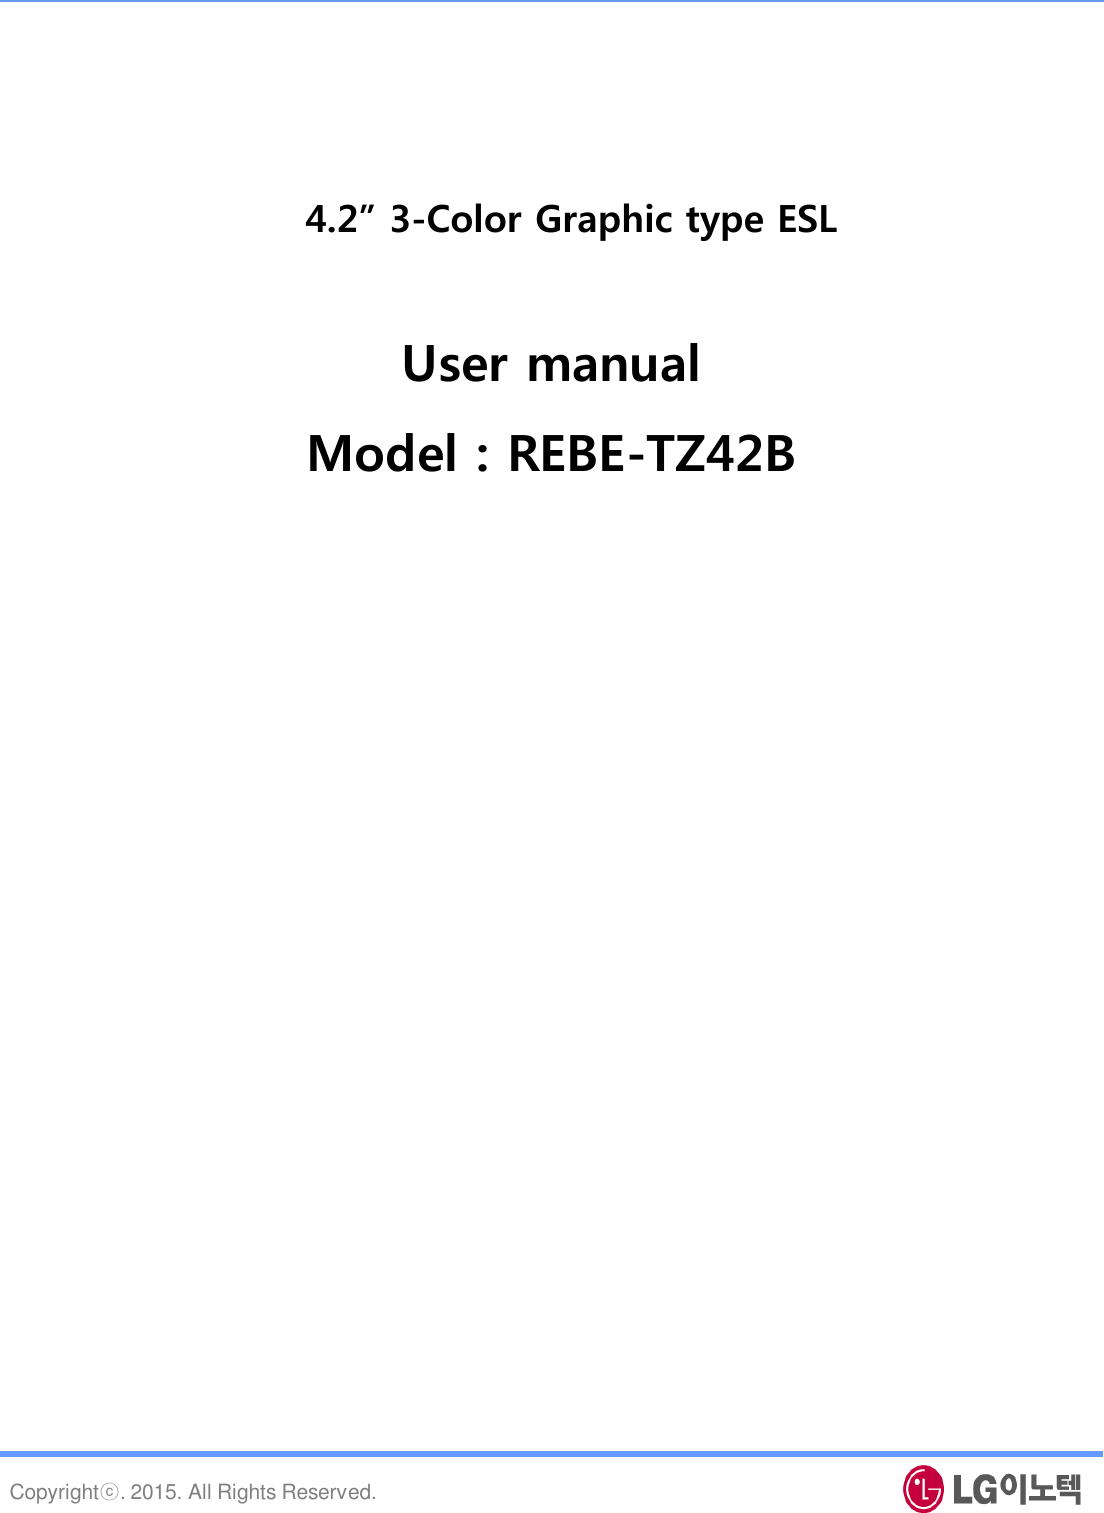 Copyrightⓒ. 2015. All Rights Reserved. 4.2” 3-Color Graphic type ESL User manual Model : REBE-TZ42B 